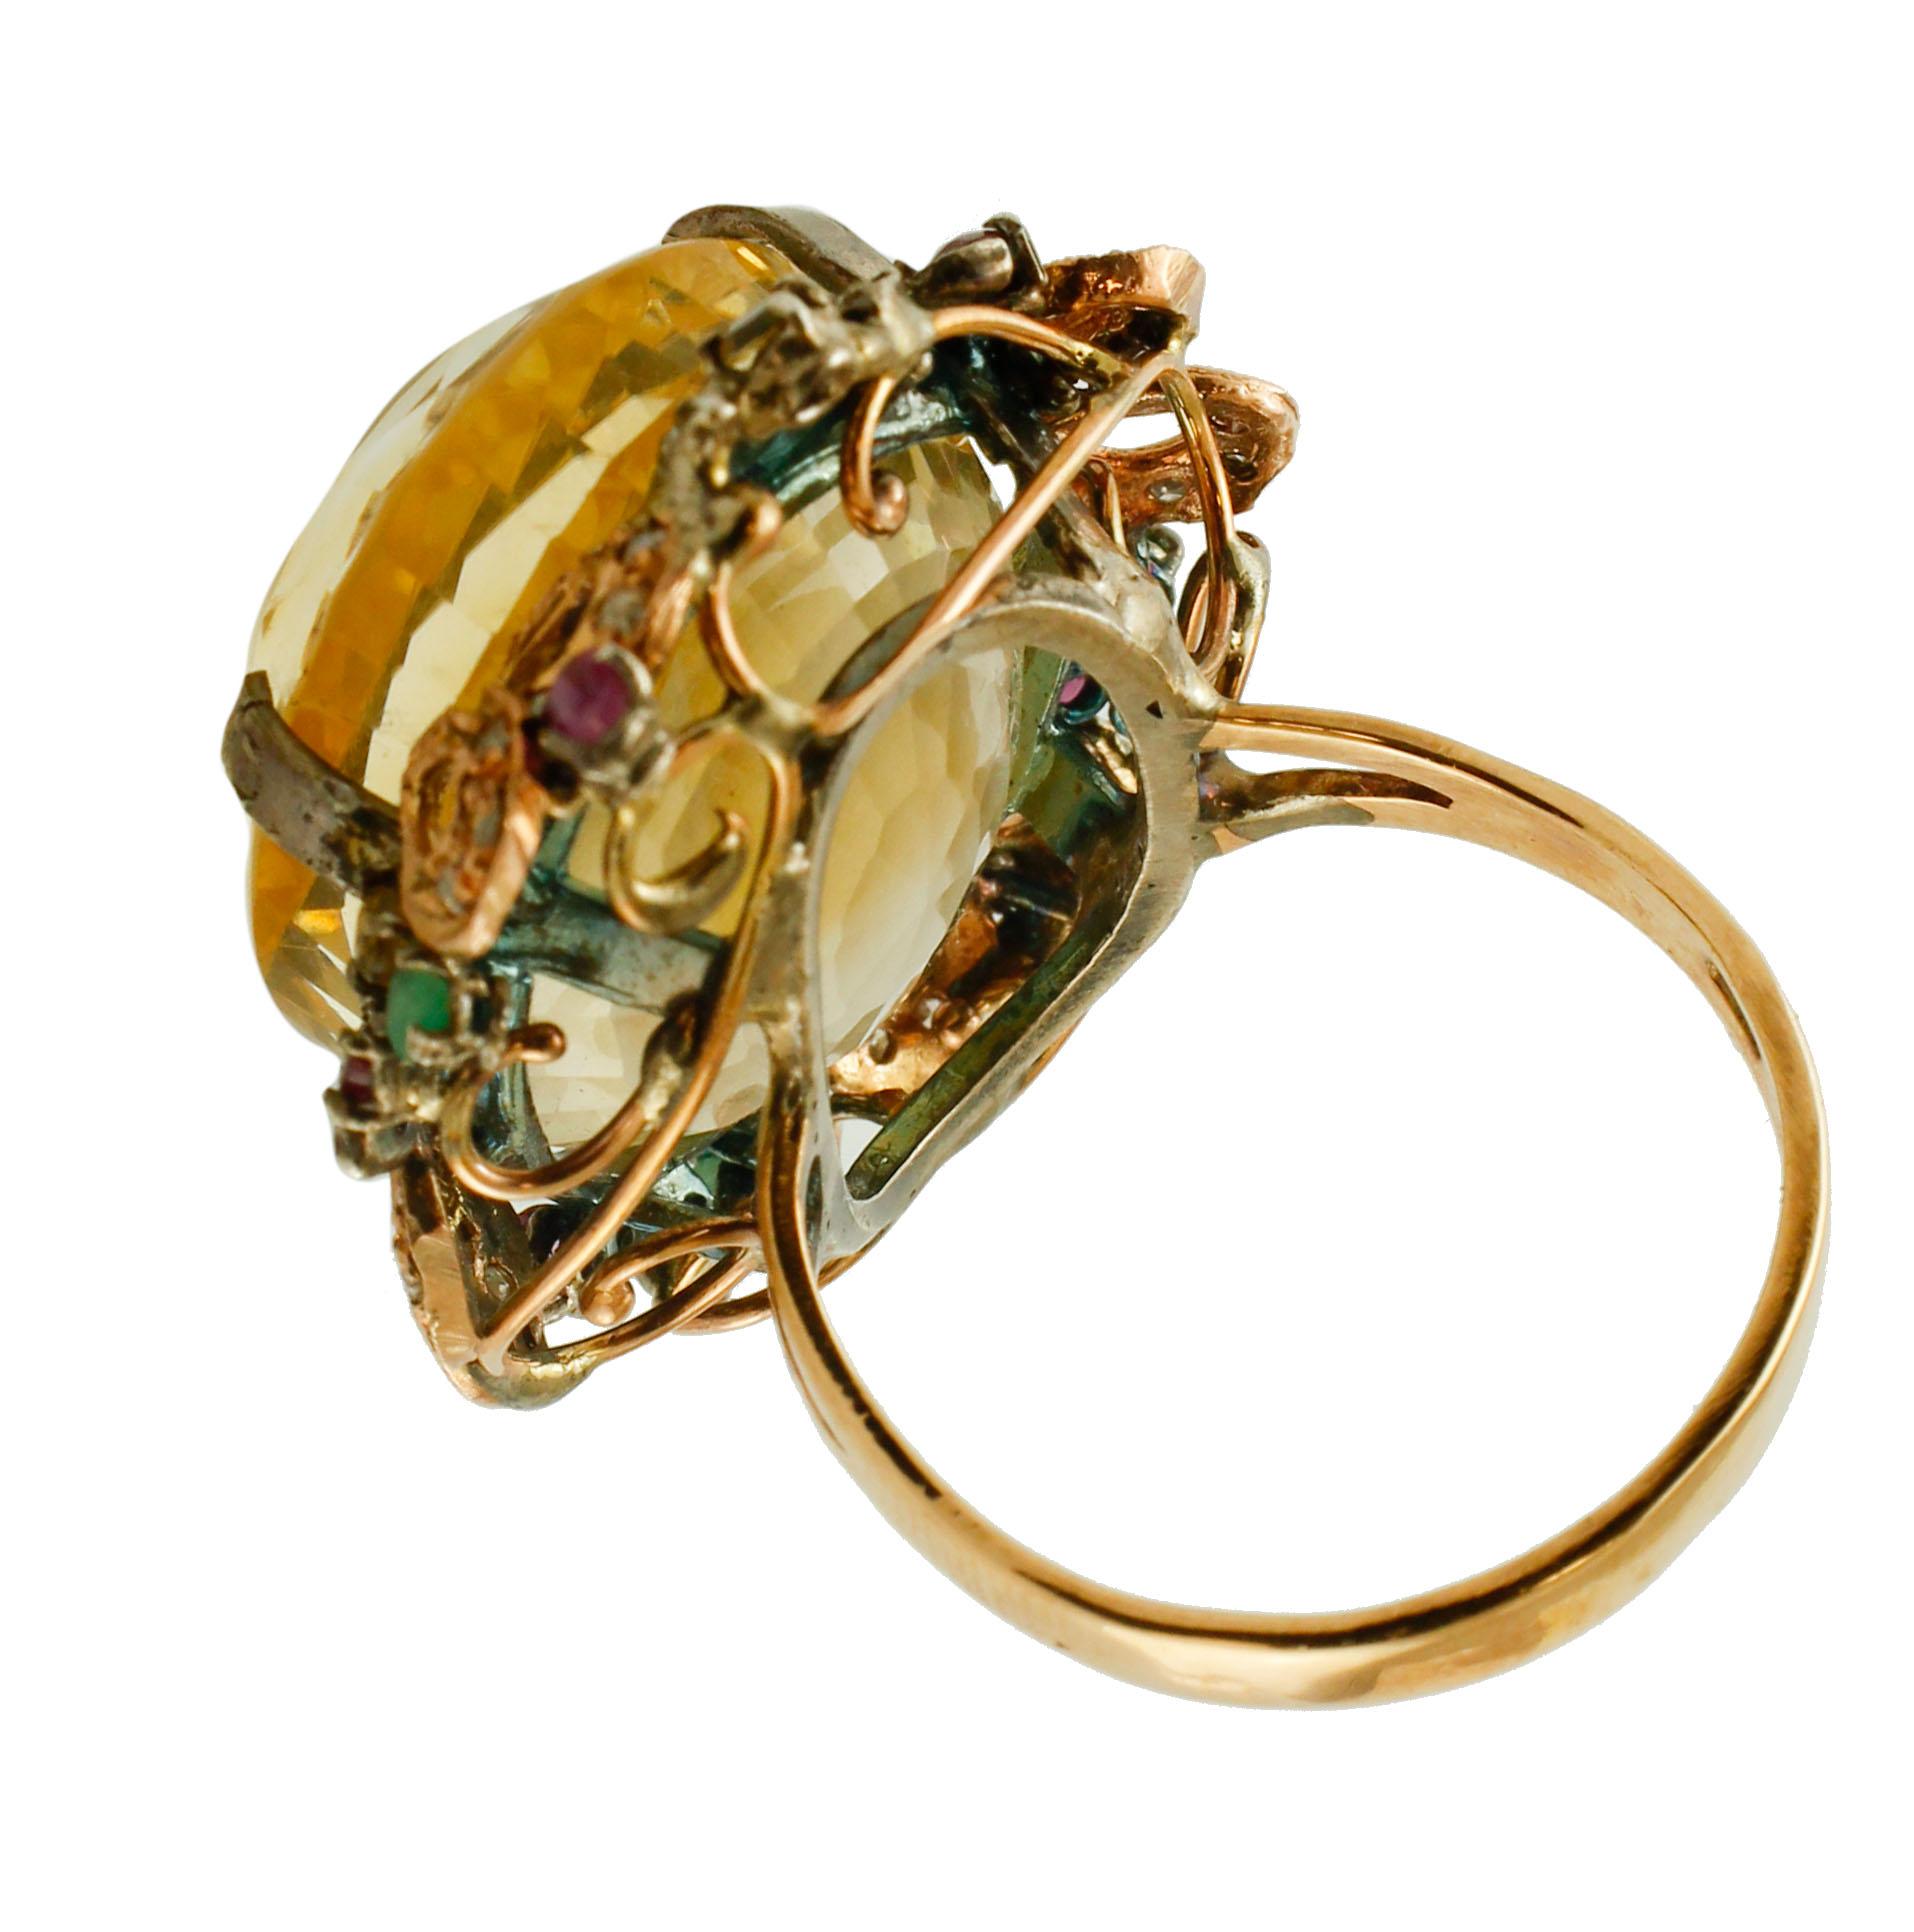 SHIPPING POLICY:
No additional costs will be added to this order.
Shipping costs will be totally covered by the seller (customs duties included).


Beautiful retro ring mounted with a big yellow topaz in the centre, surrounded by a flowery frame in